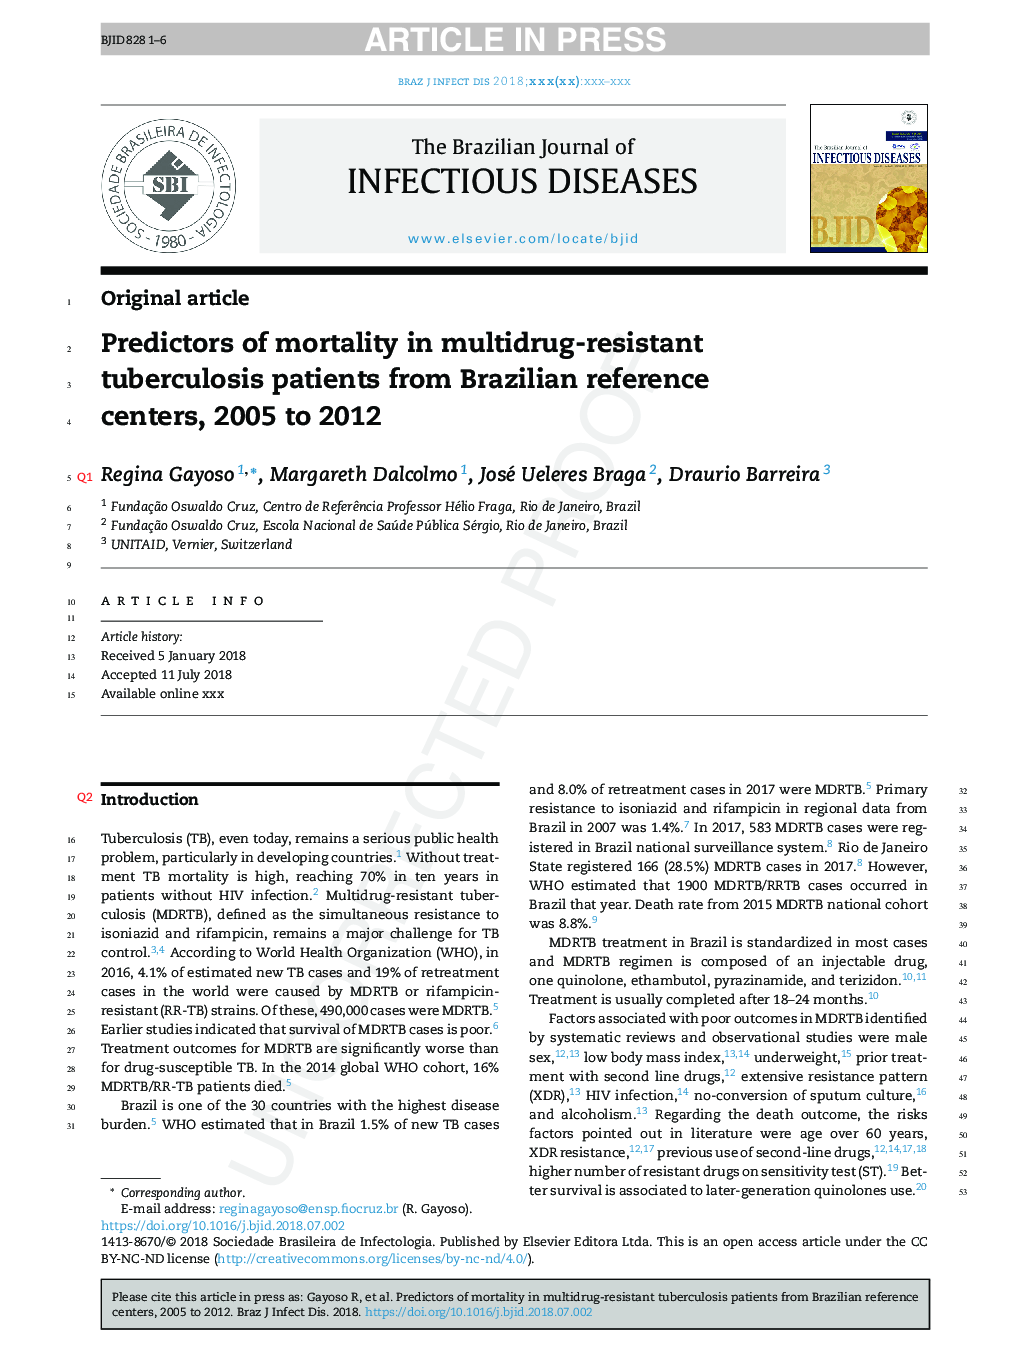 Predictors of mortality in multidrug-resistant tuberculosis patients from Brazilian reference centers, 2005 to 2012